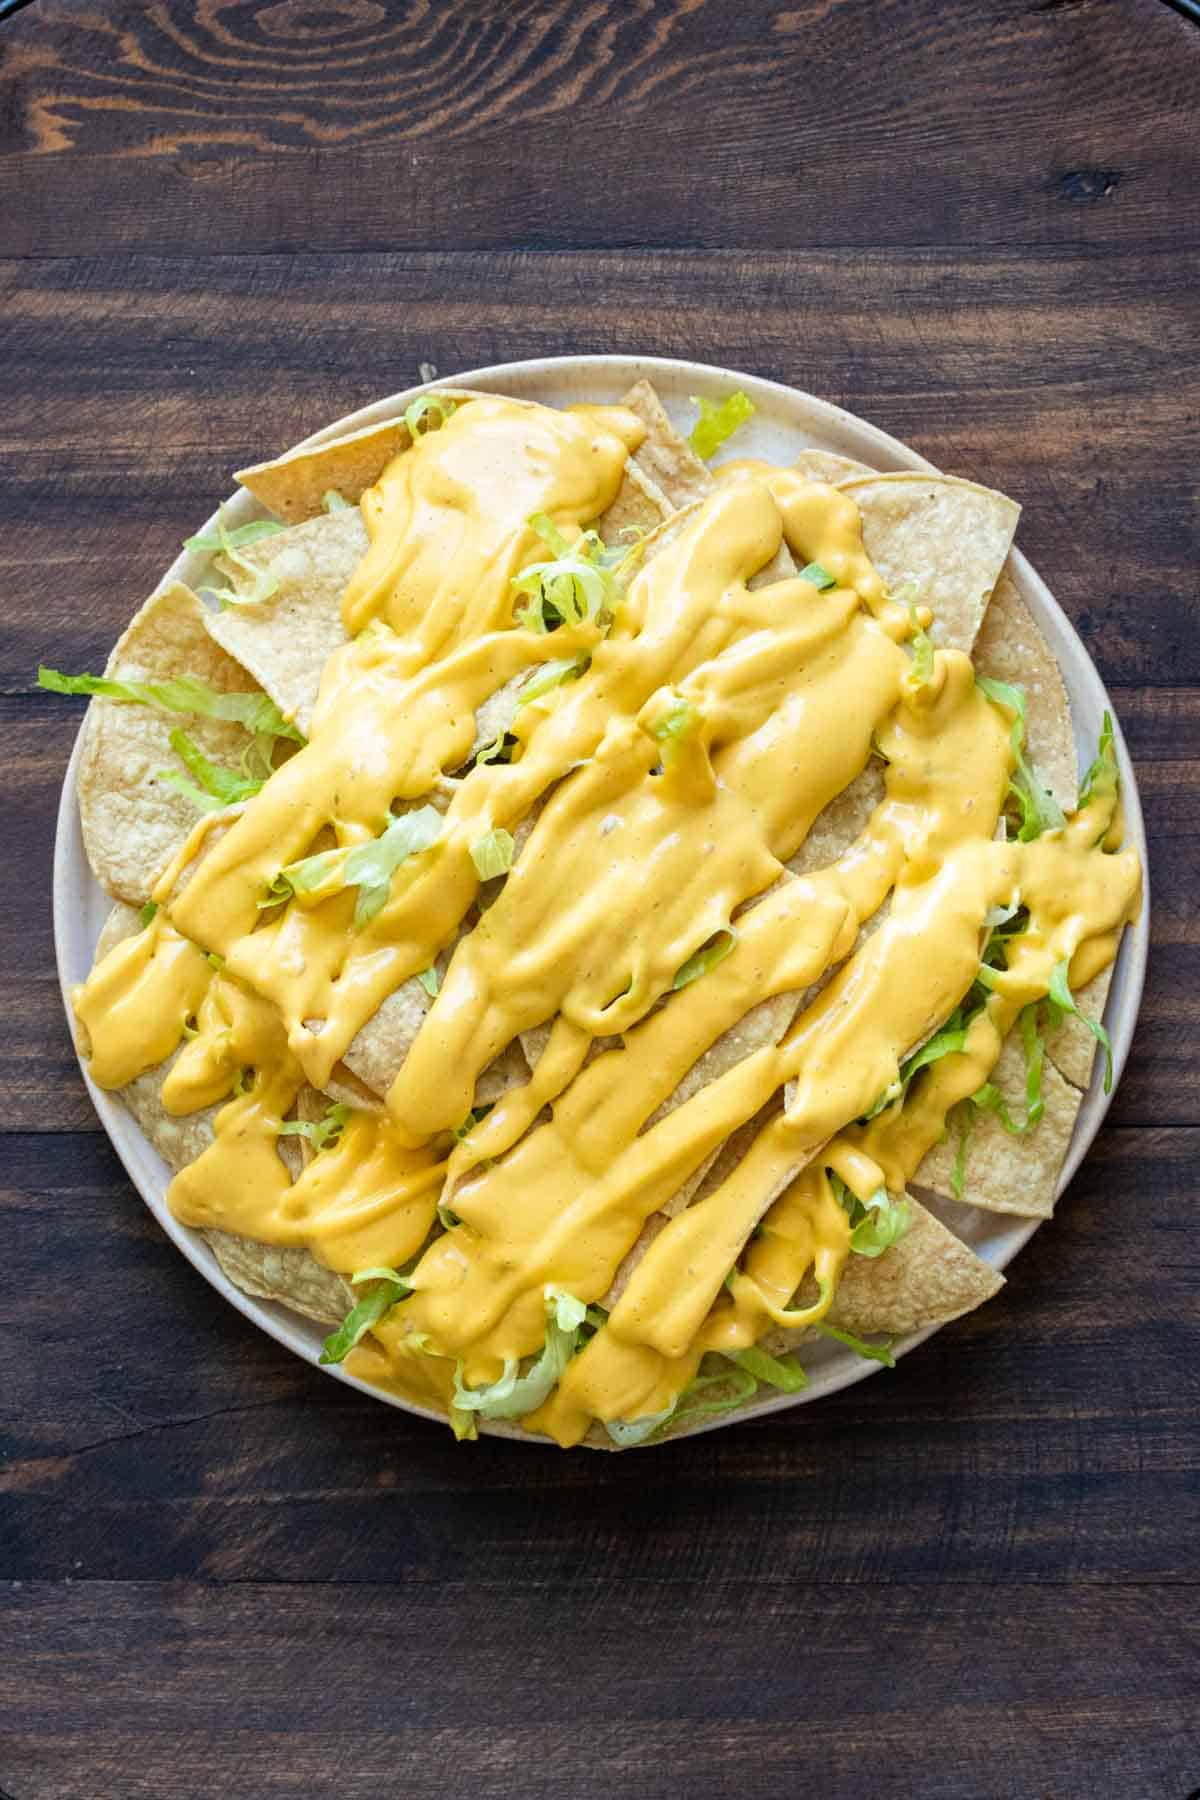 A plate piled with tortilla chips, lettuce and cheese sauce